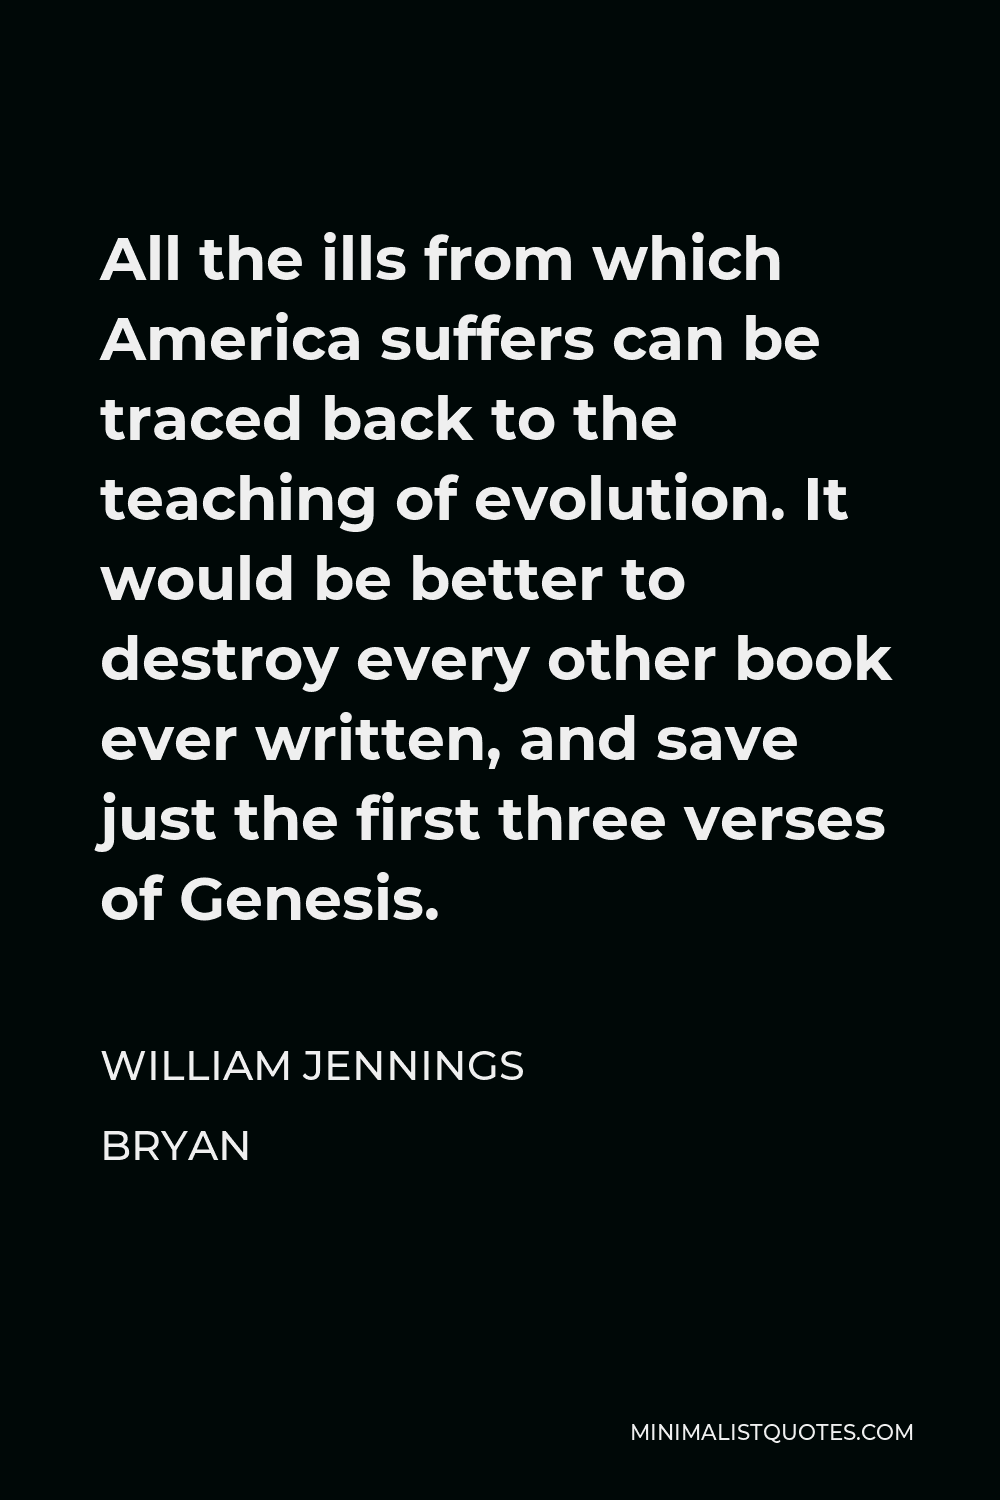 William Jennings Bryan Quote - All the ills from which America suffers can be traced to the teaching of evolution.